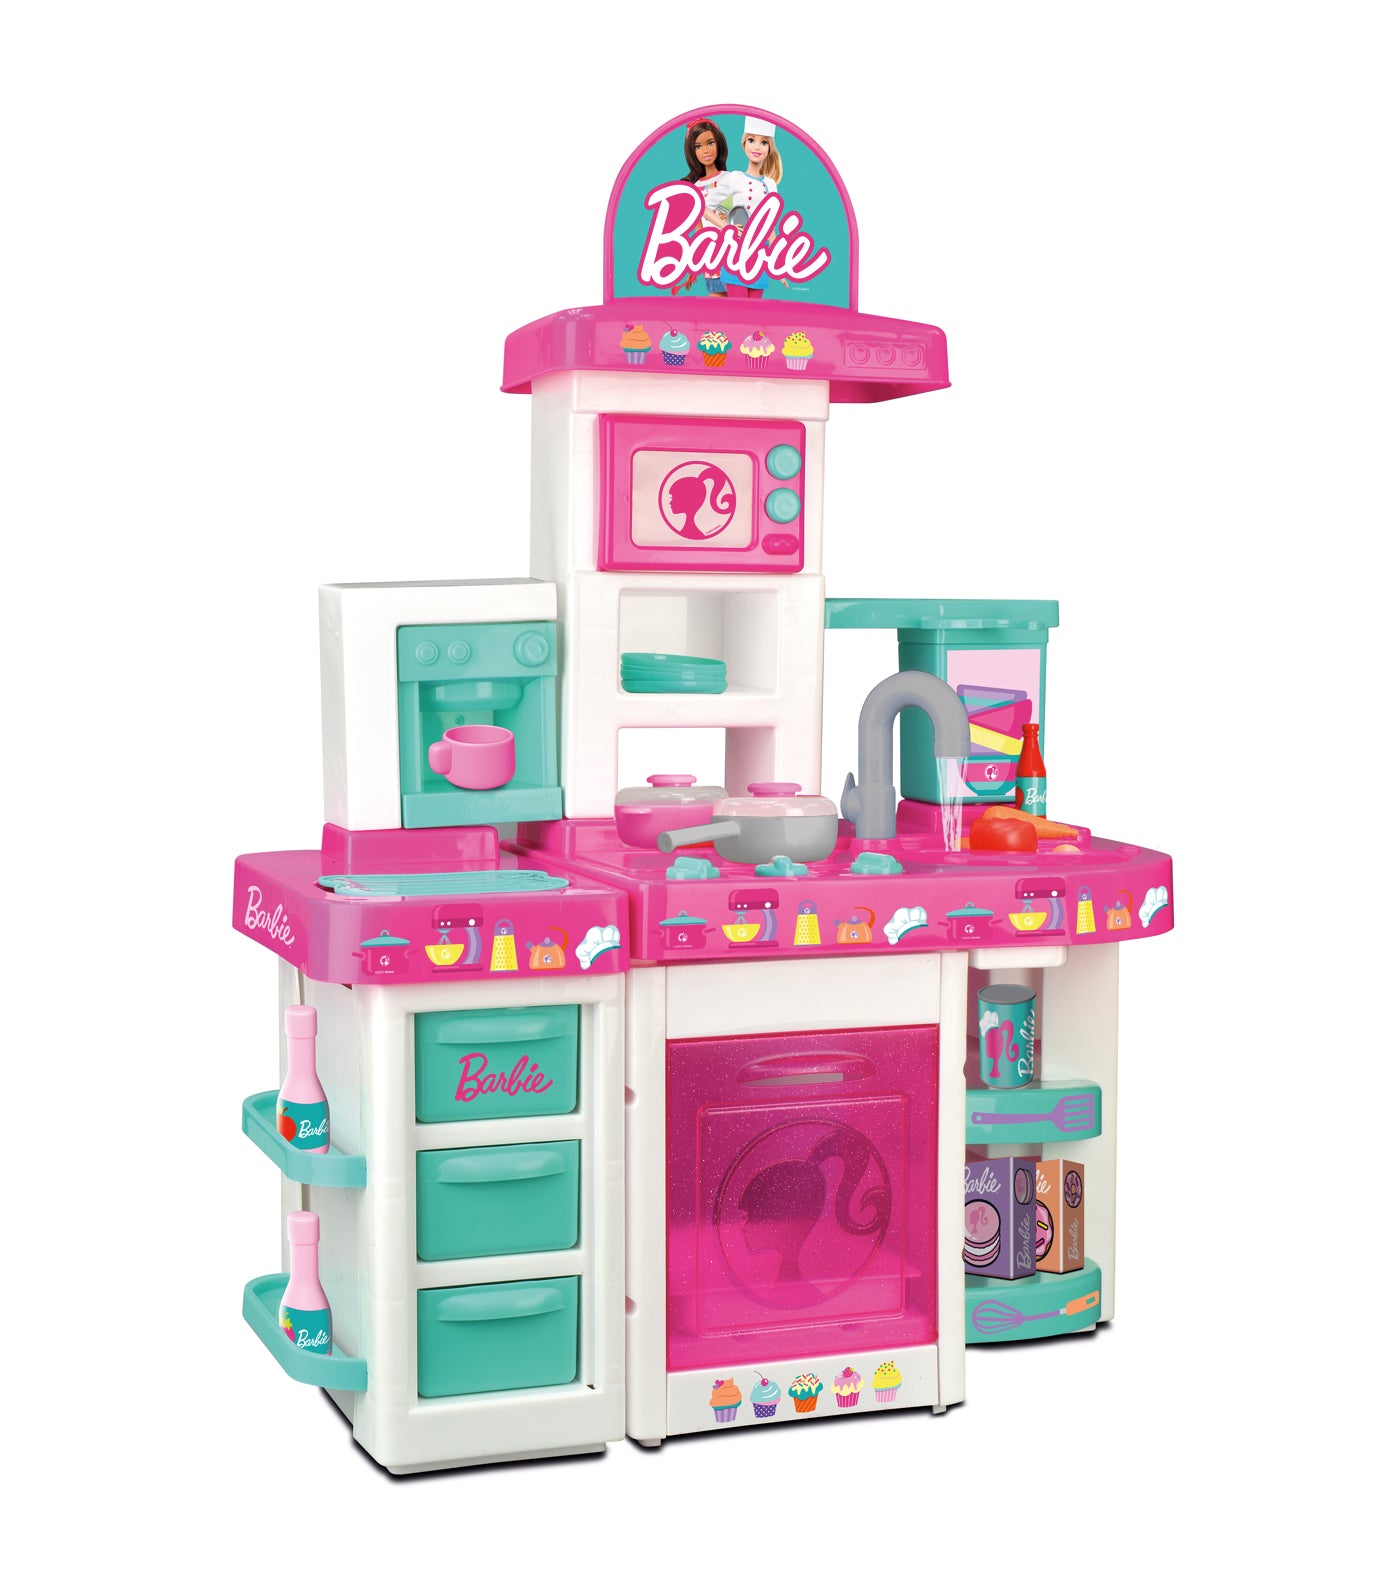 Play-Doh Kitchen Creations Candy Delight Playset, 1 ct - Harris Teeter